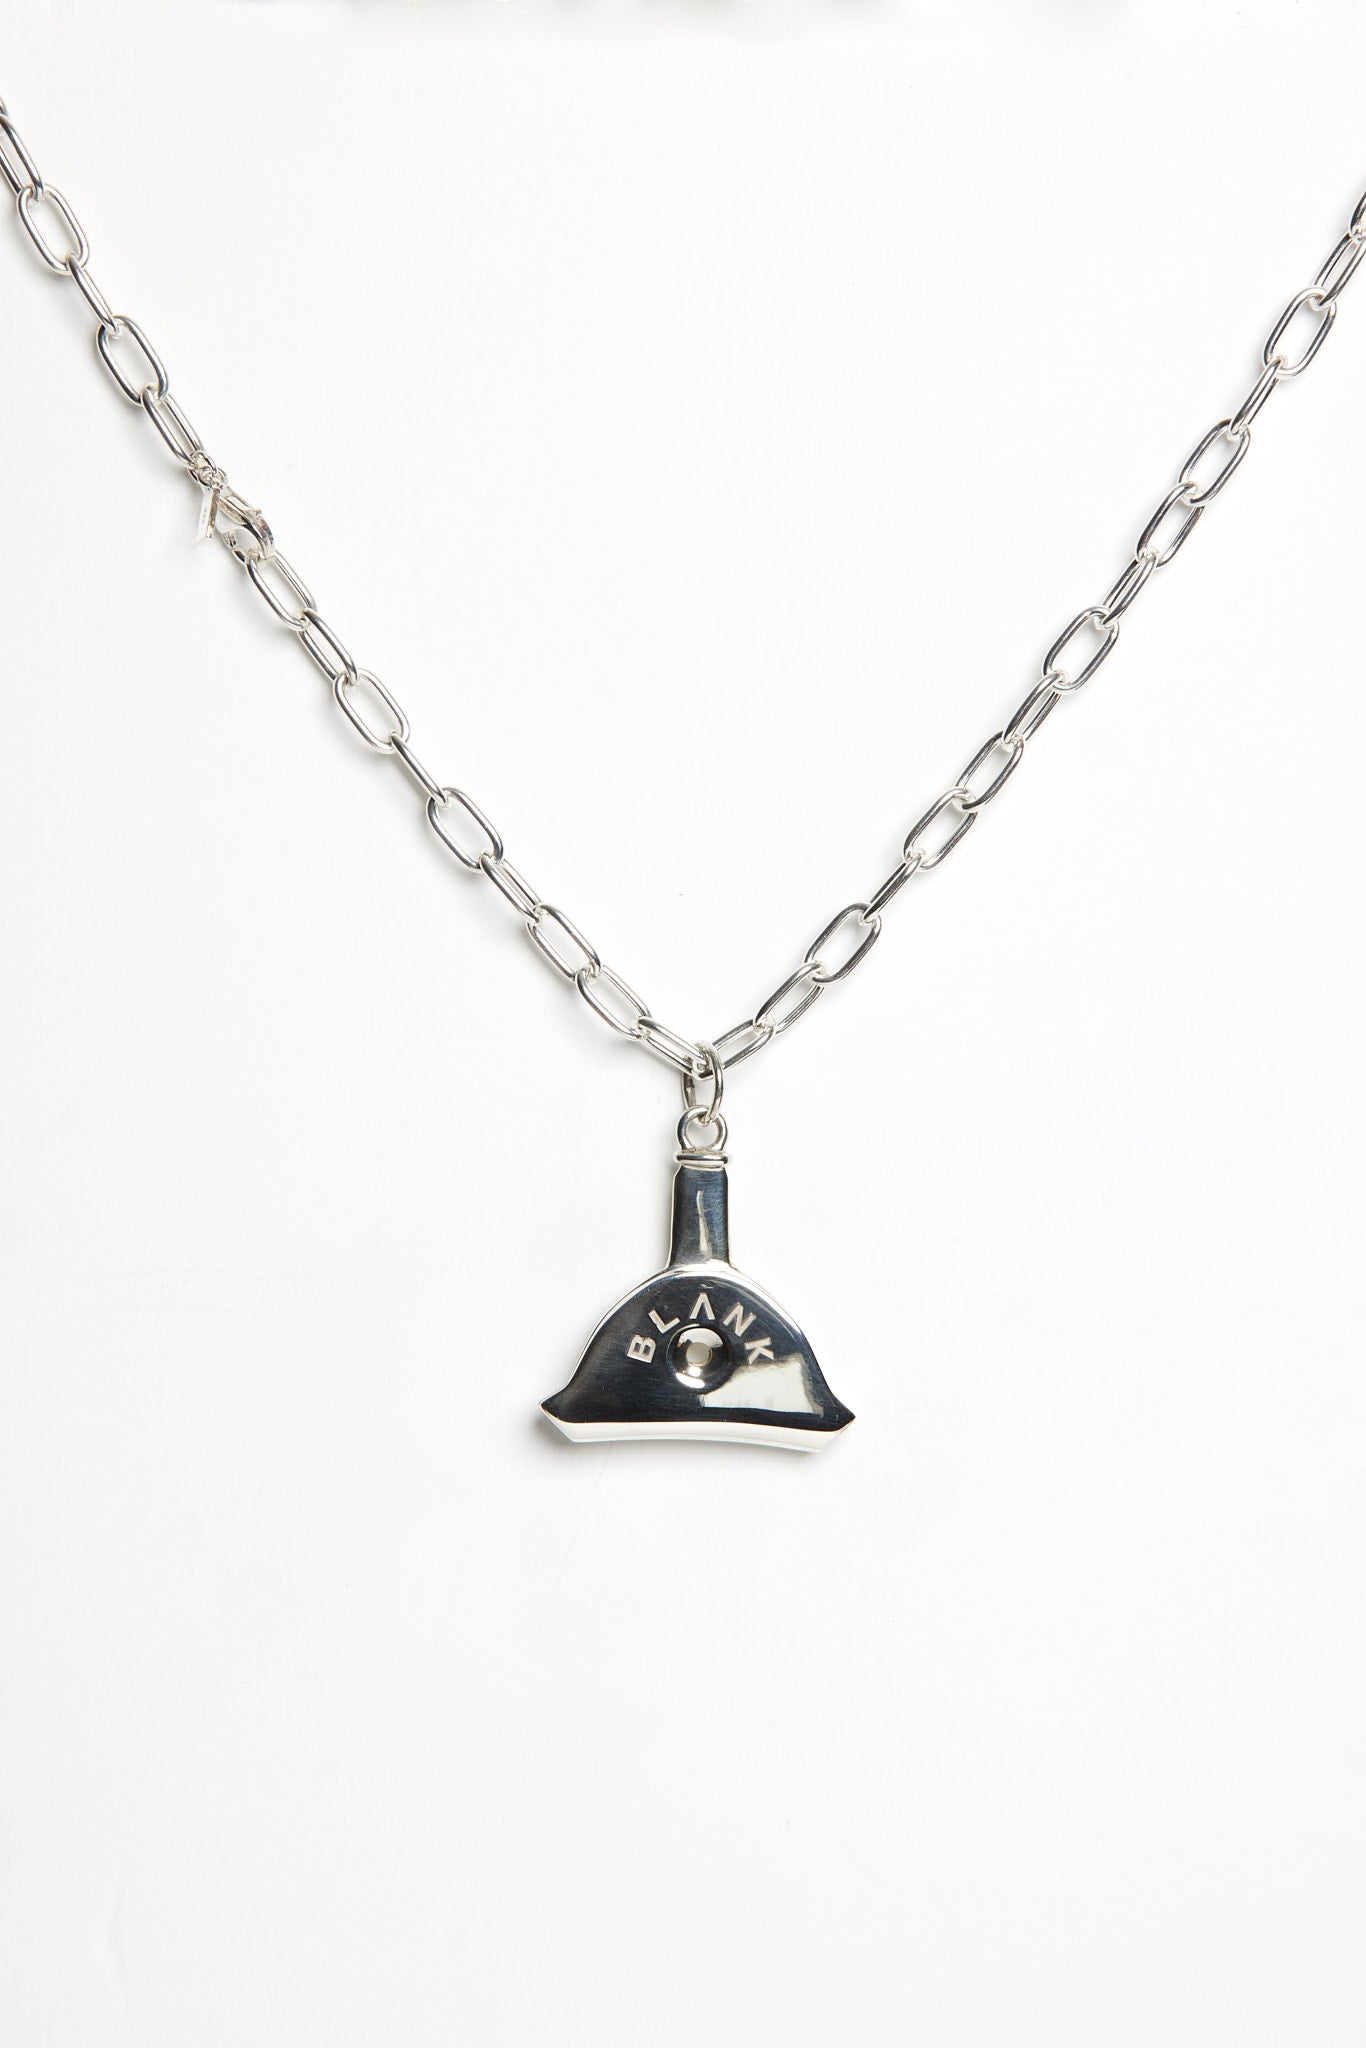 WHISTLE NECKLACE